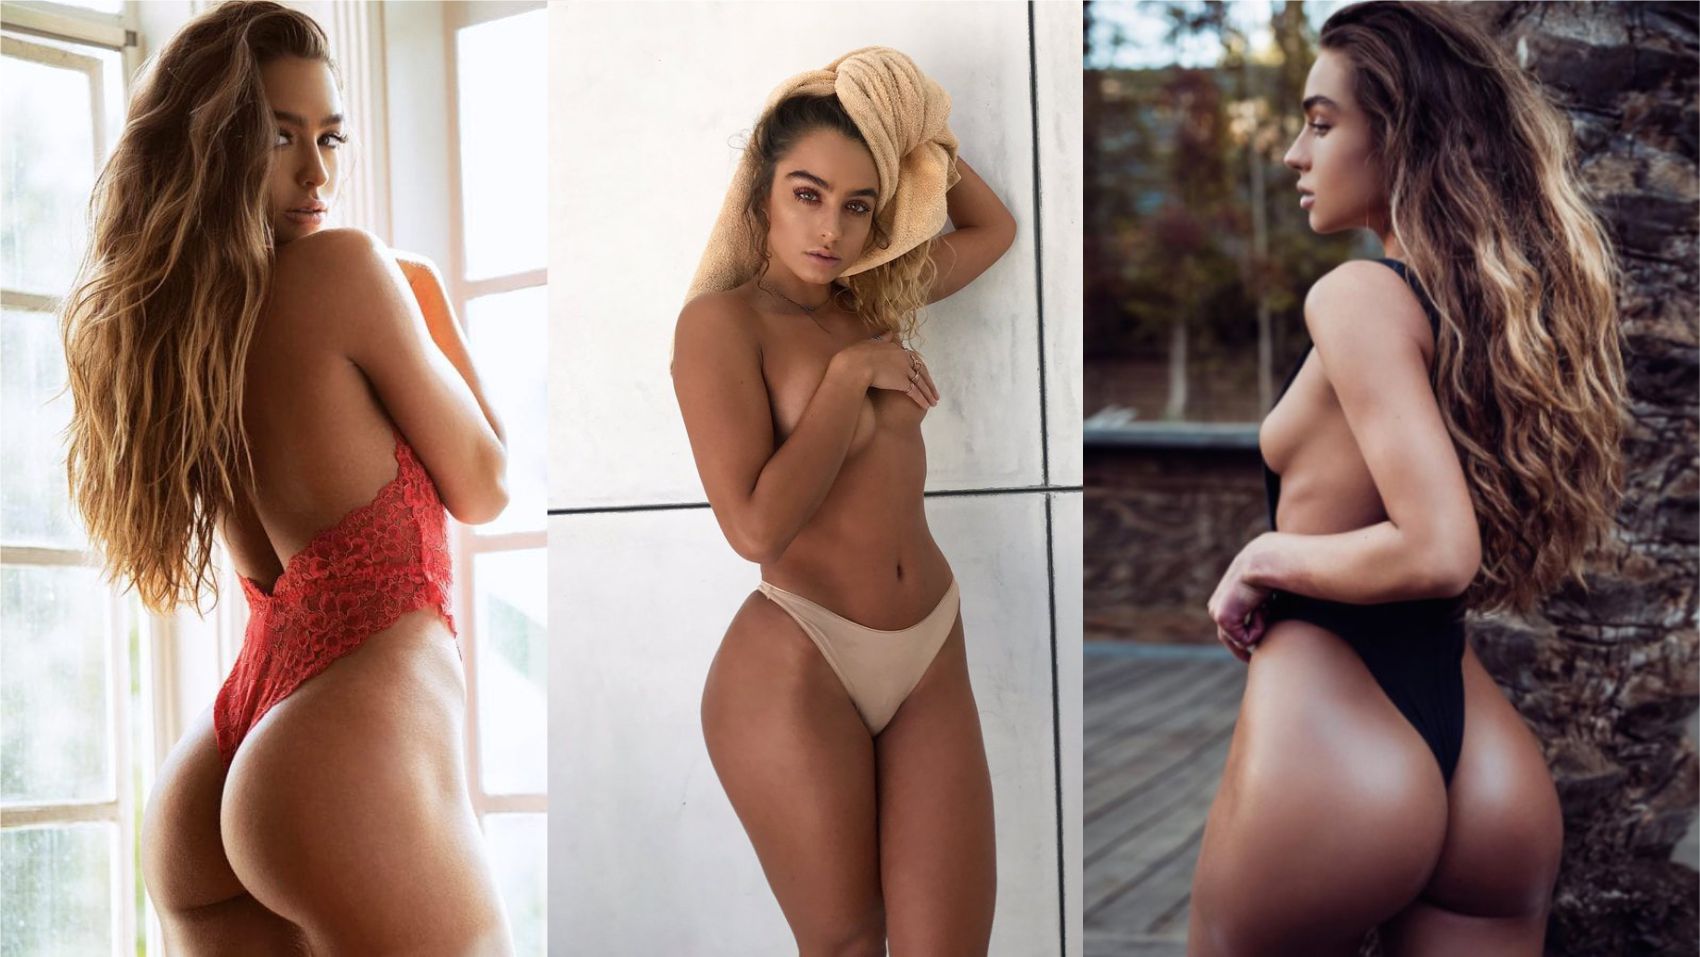 Sommer ray look alike porn - 🧡 Sommer Ray And Alissa Violet - Porn photos....